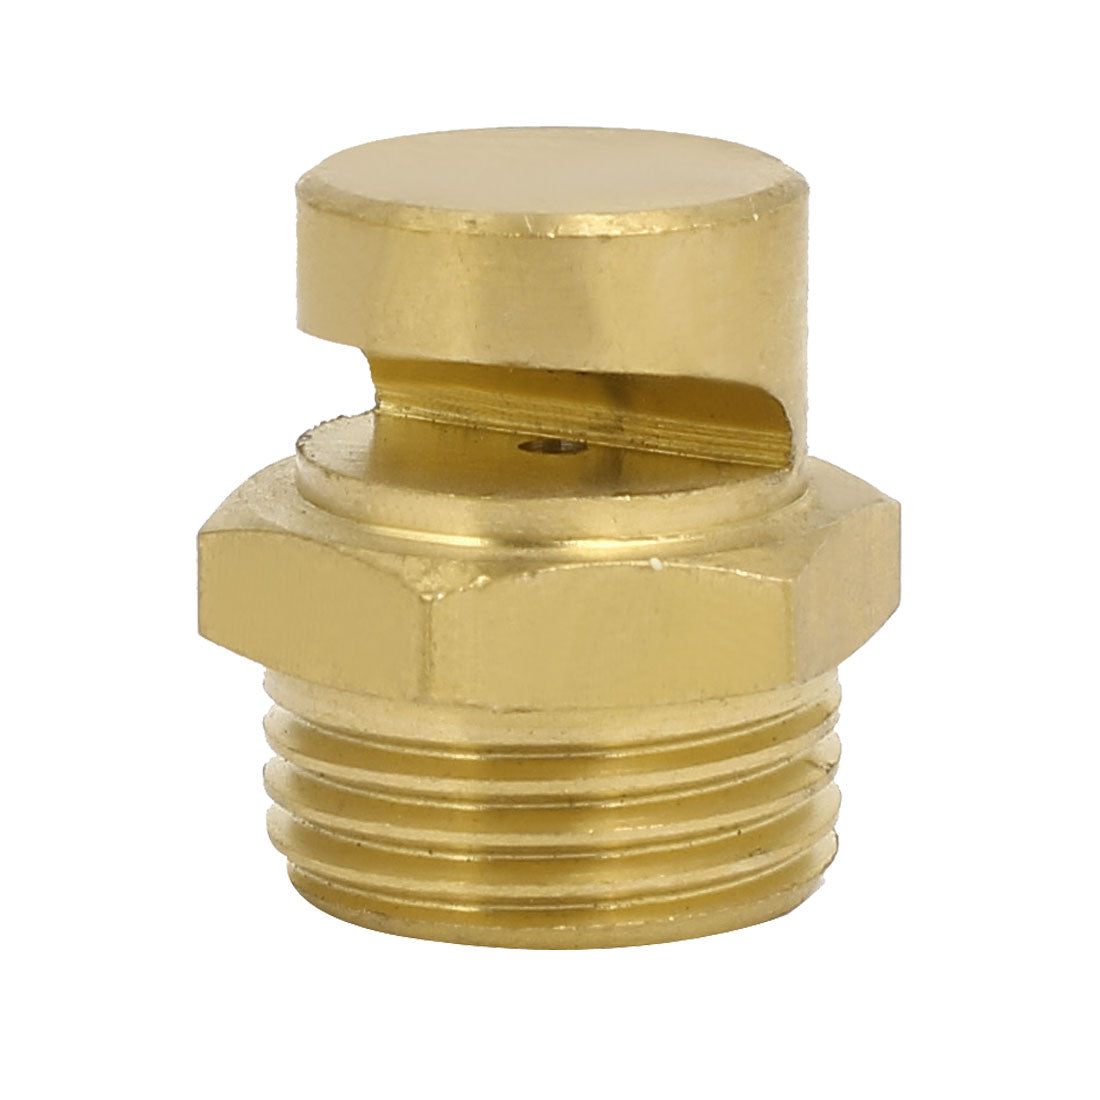 uxcell Uxcell 1/2BSP Male Thread 170 Degree Angle Flat Fan Spray Tip Brass Tone 2pcs